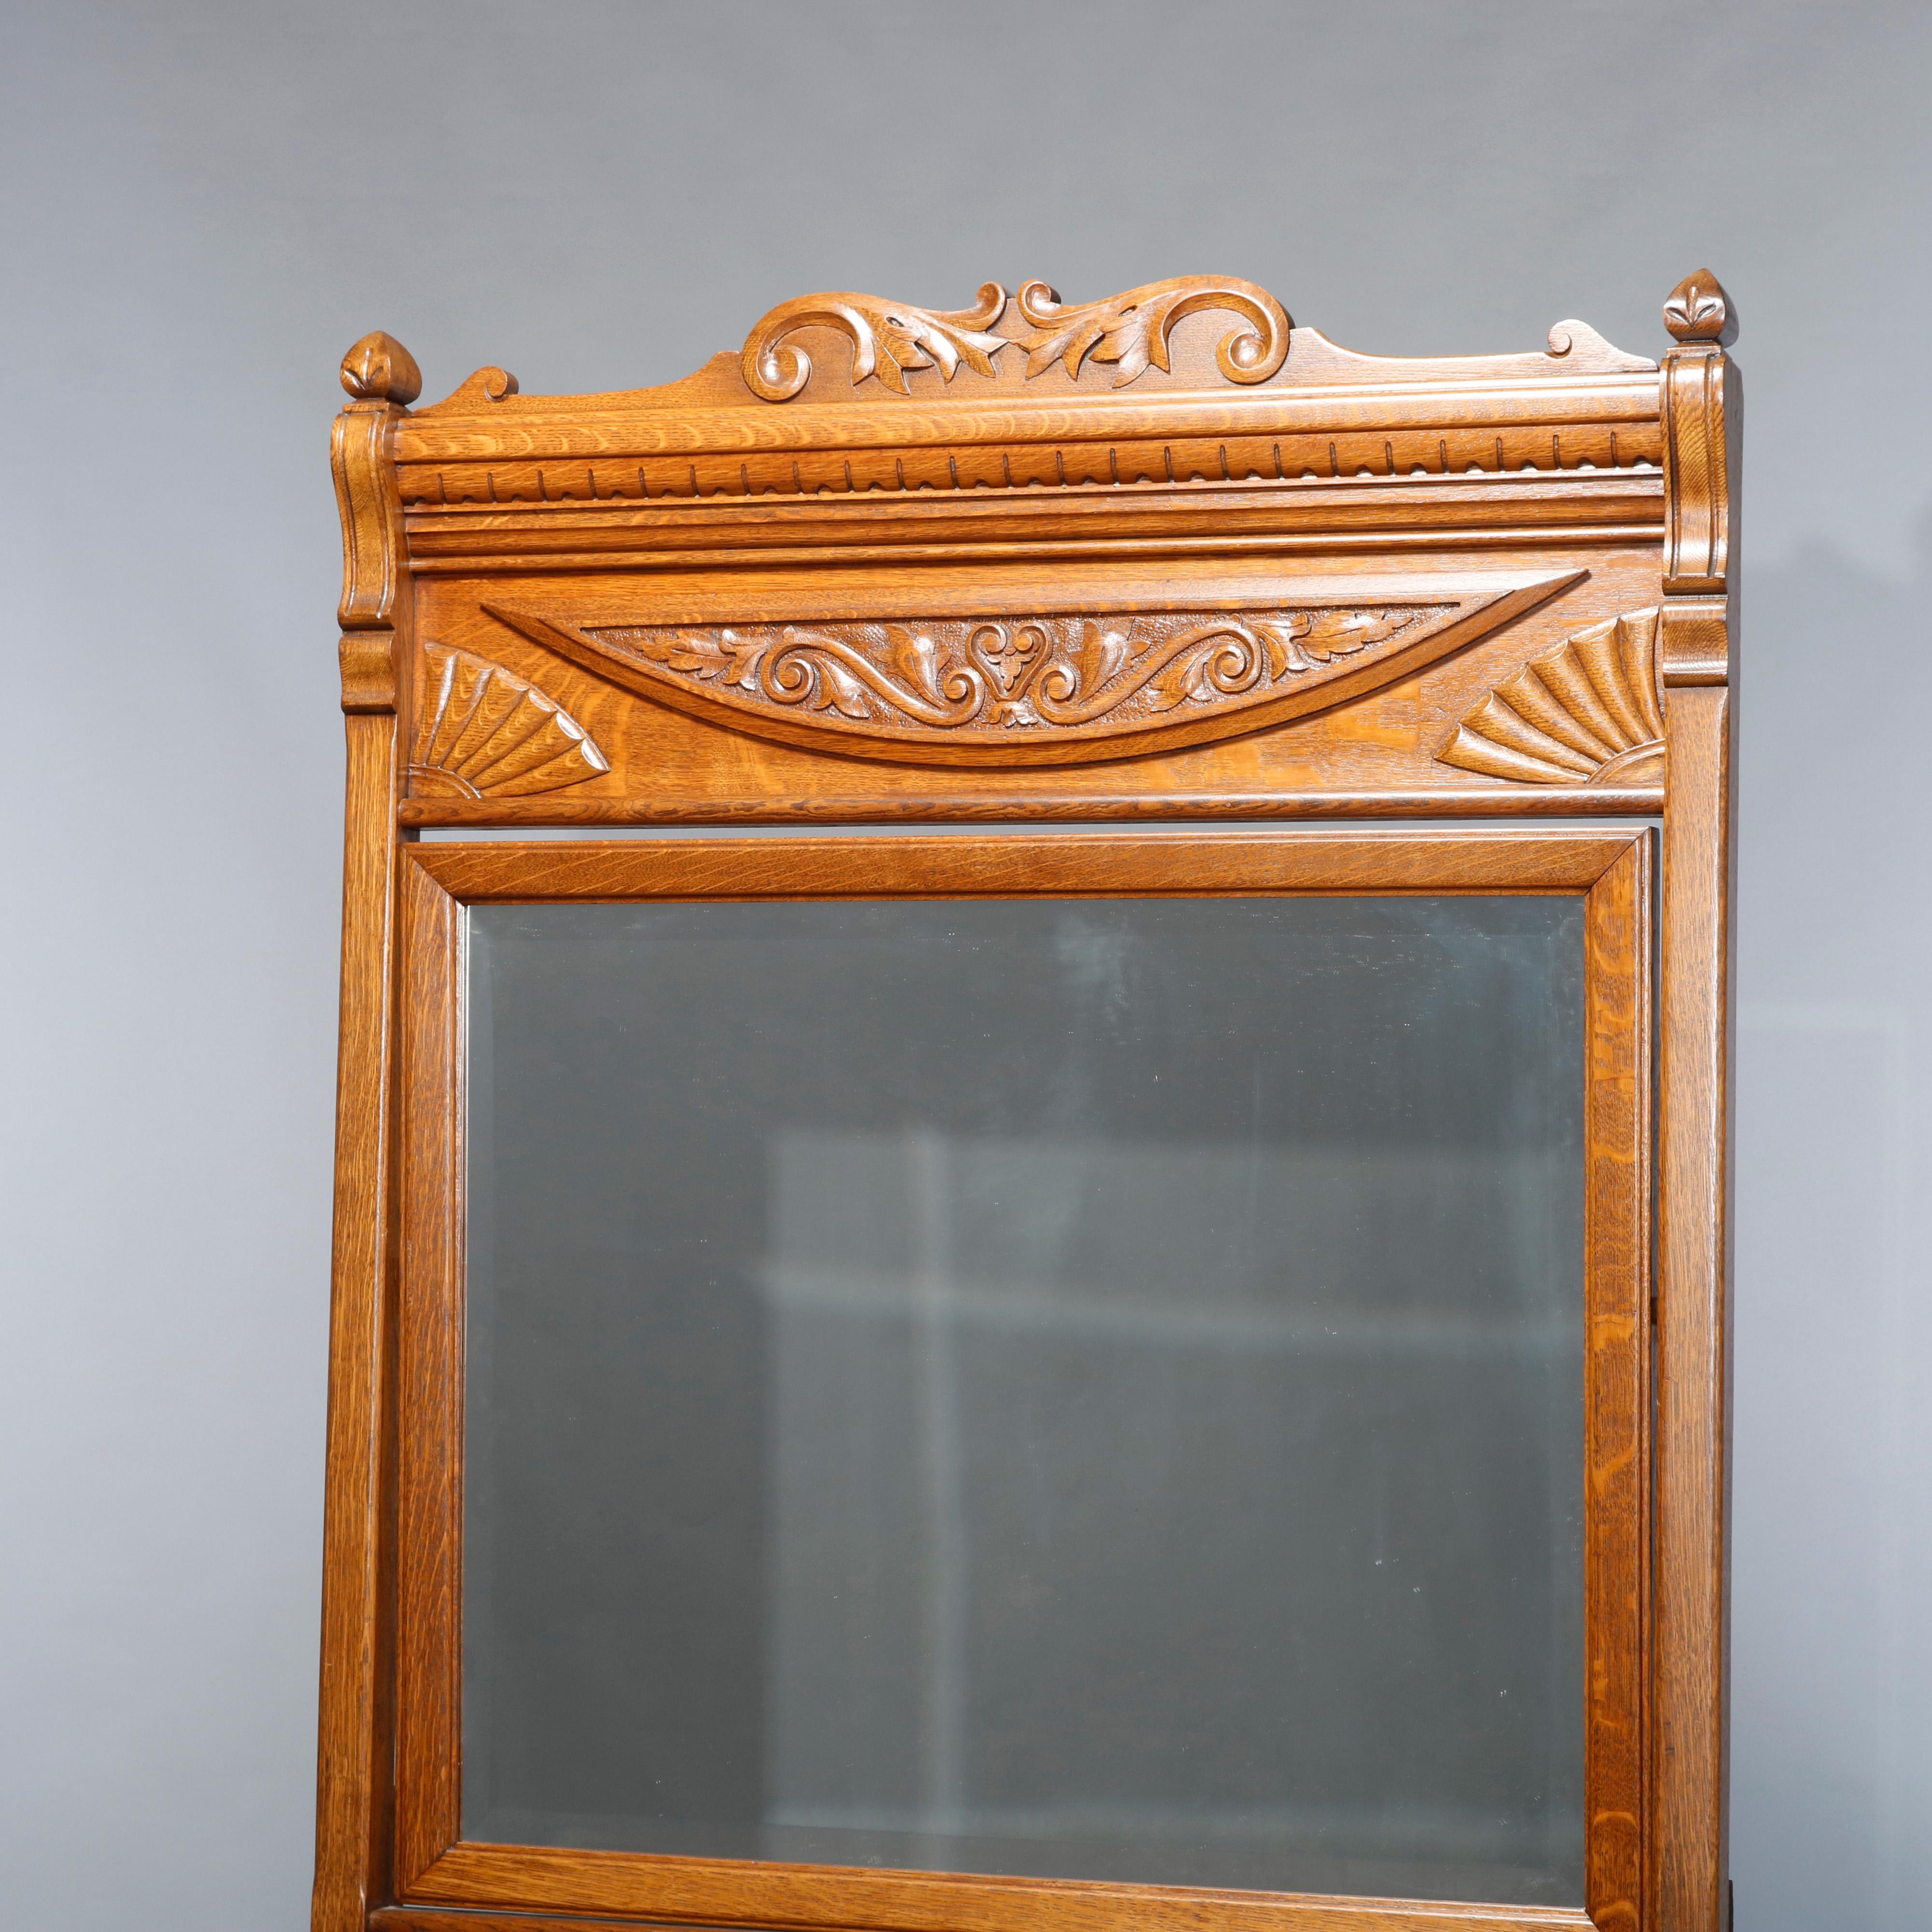 An antique chest of drawers in the manner of RJ Horner offers four drawer dresser with mirror having carved frame with stylized fan and foliate elements, c1900

Measures: 83.5